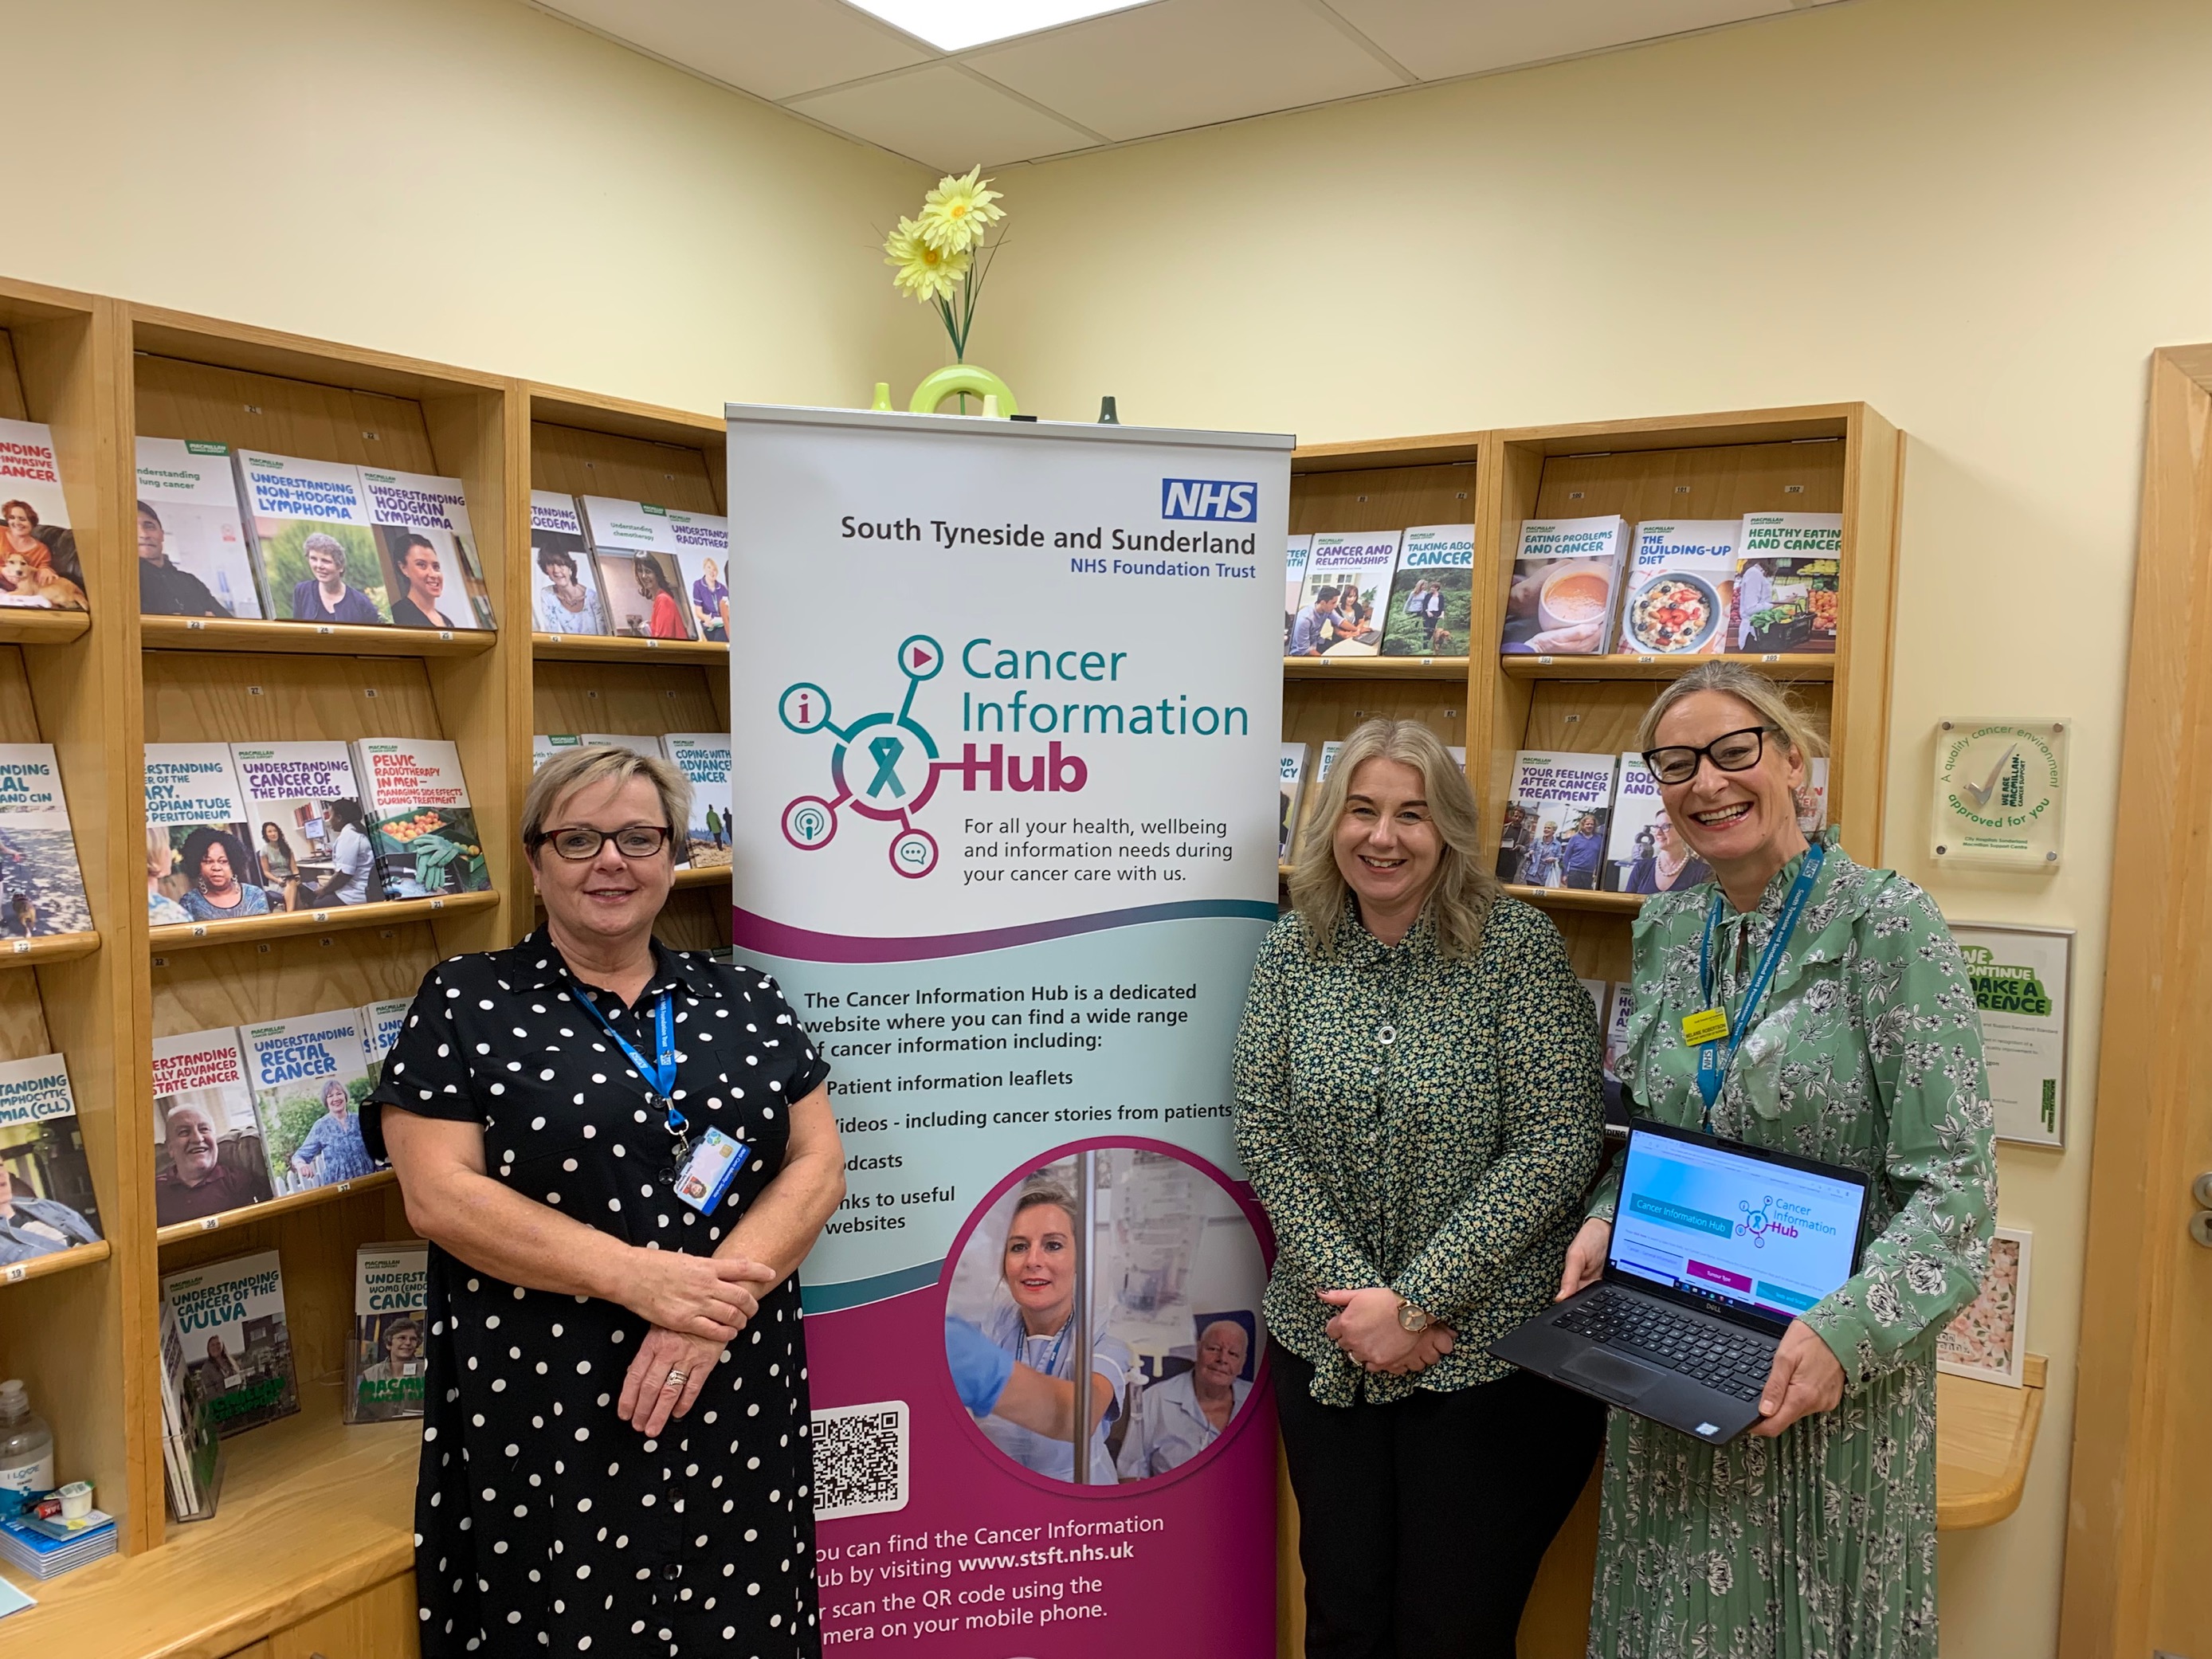 Debra Spraggon, Kelly Craggs and Melanie Robertson, who are members of the Trust's Macmillan team, with information about the Cancer Hub site..jpg